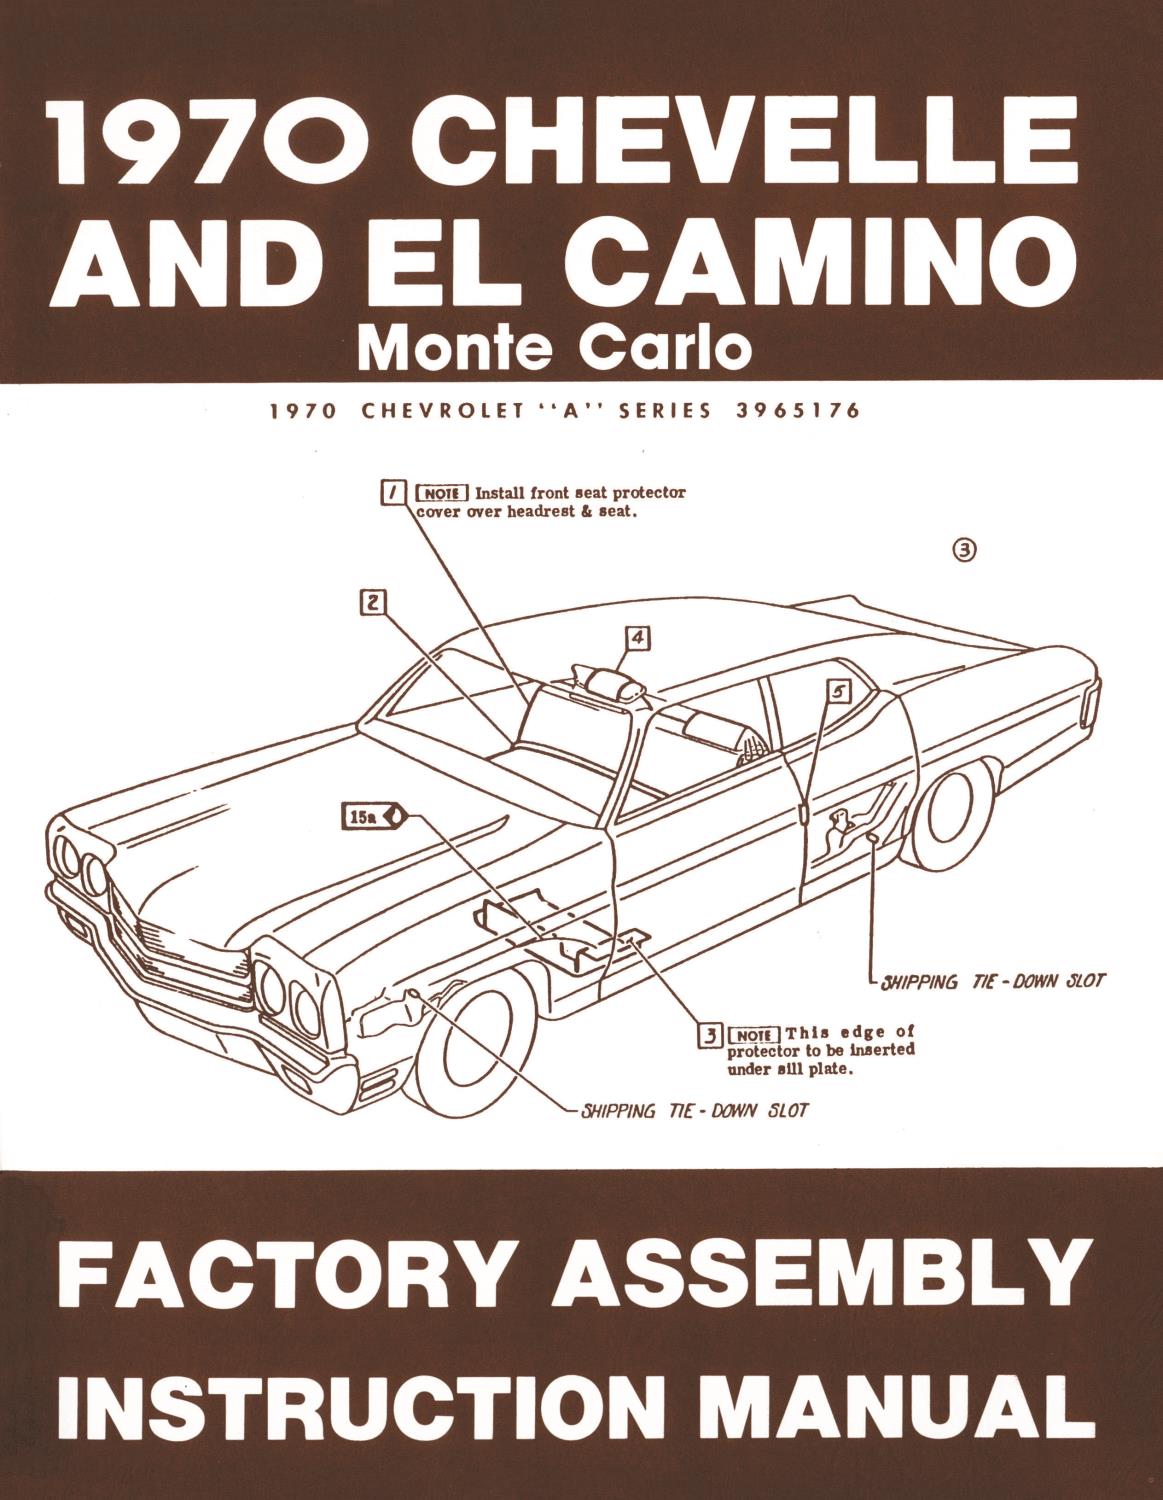 Factory Assembly Instruction Manual for 1970 Chevrolet Chevelle, El Camino and Monte Carlo